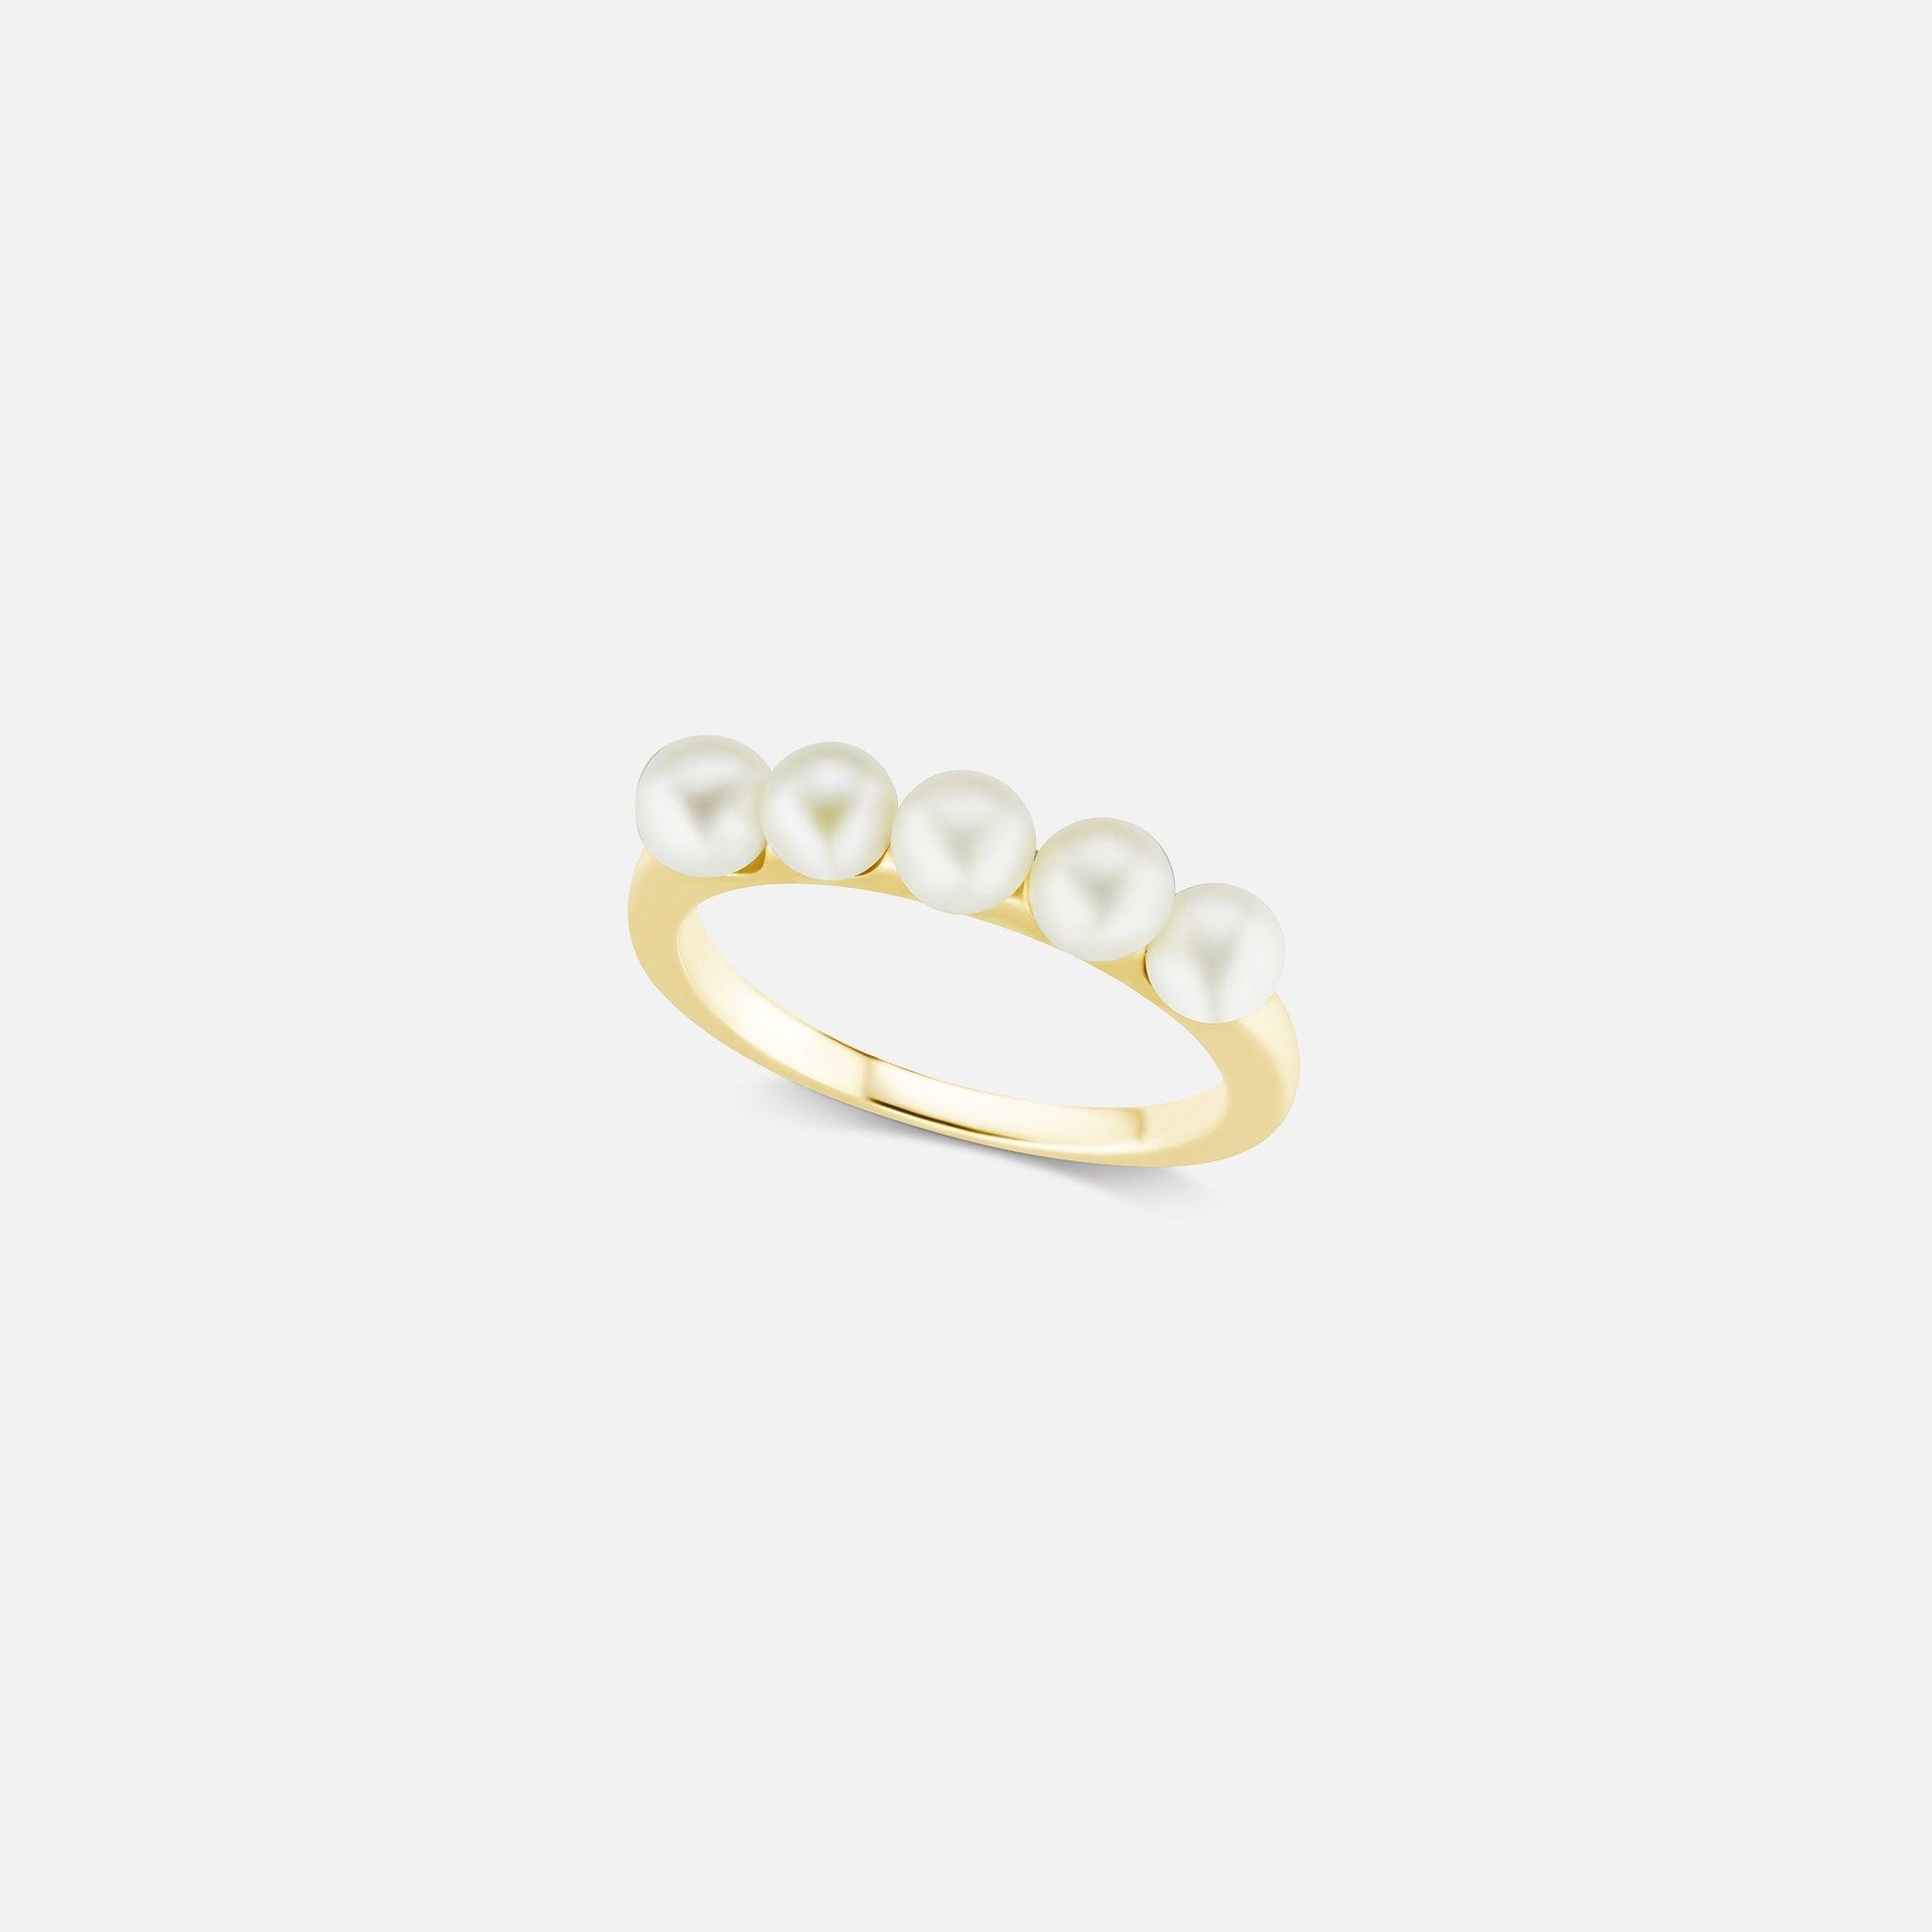 The Gold Multi Pearl Ring